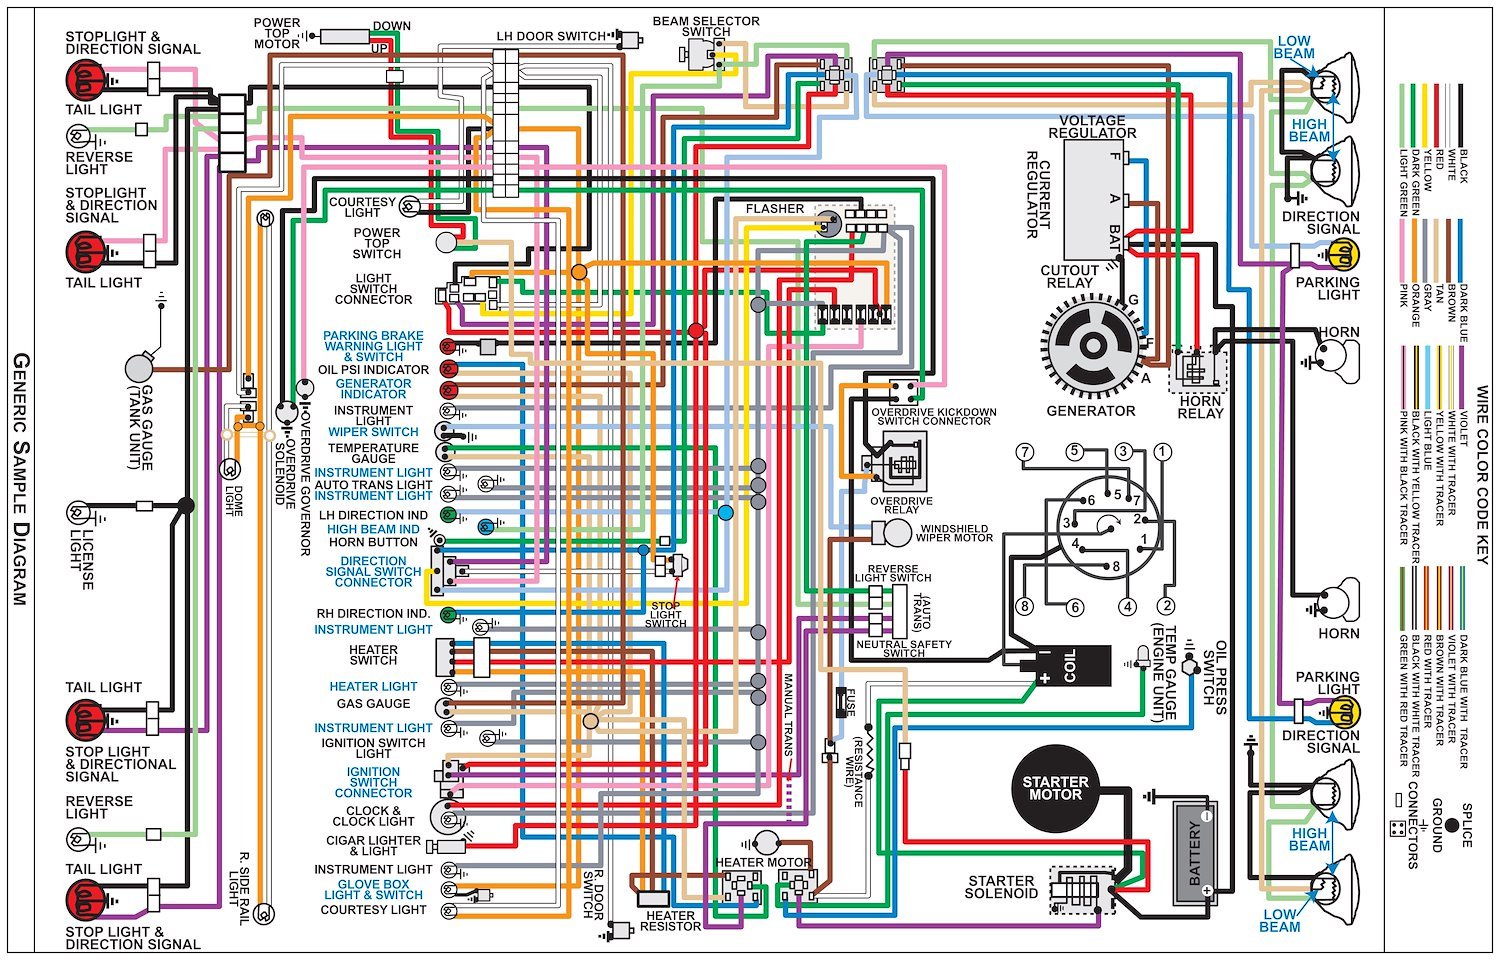 Wiring Diagram for 1969 Plymouth Belvedere, GTX, Road Runner, Satellite, 11 in x 17 in., Laminated